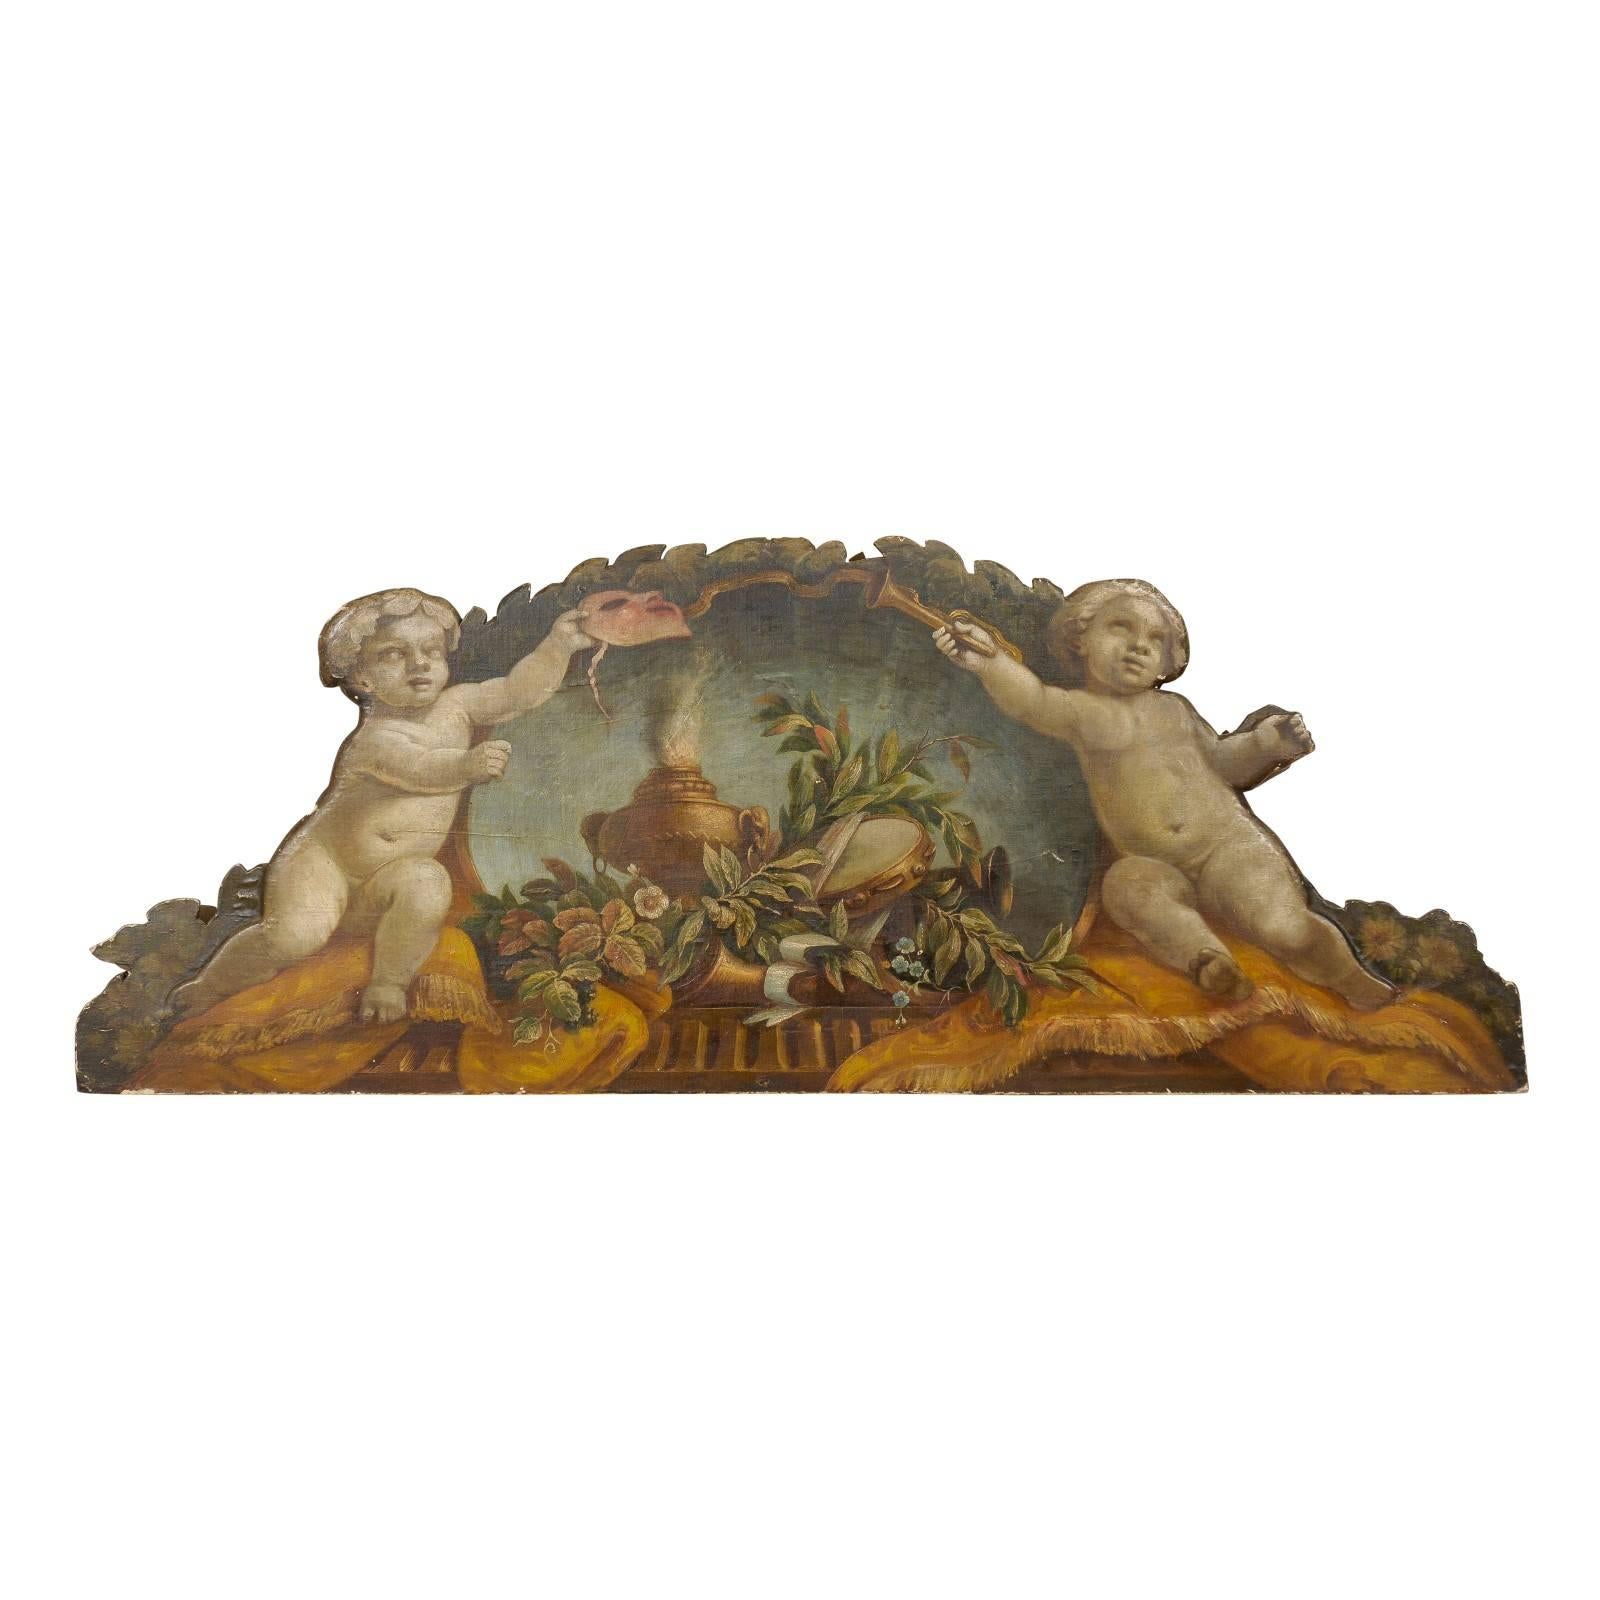 Exquisite 19th Century Italian Panel Featuring Allegories of Music and Theater